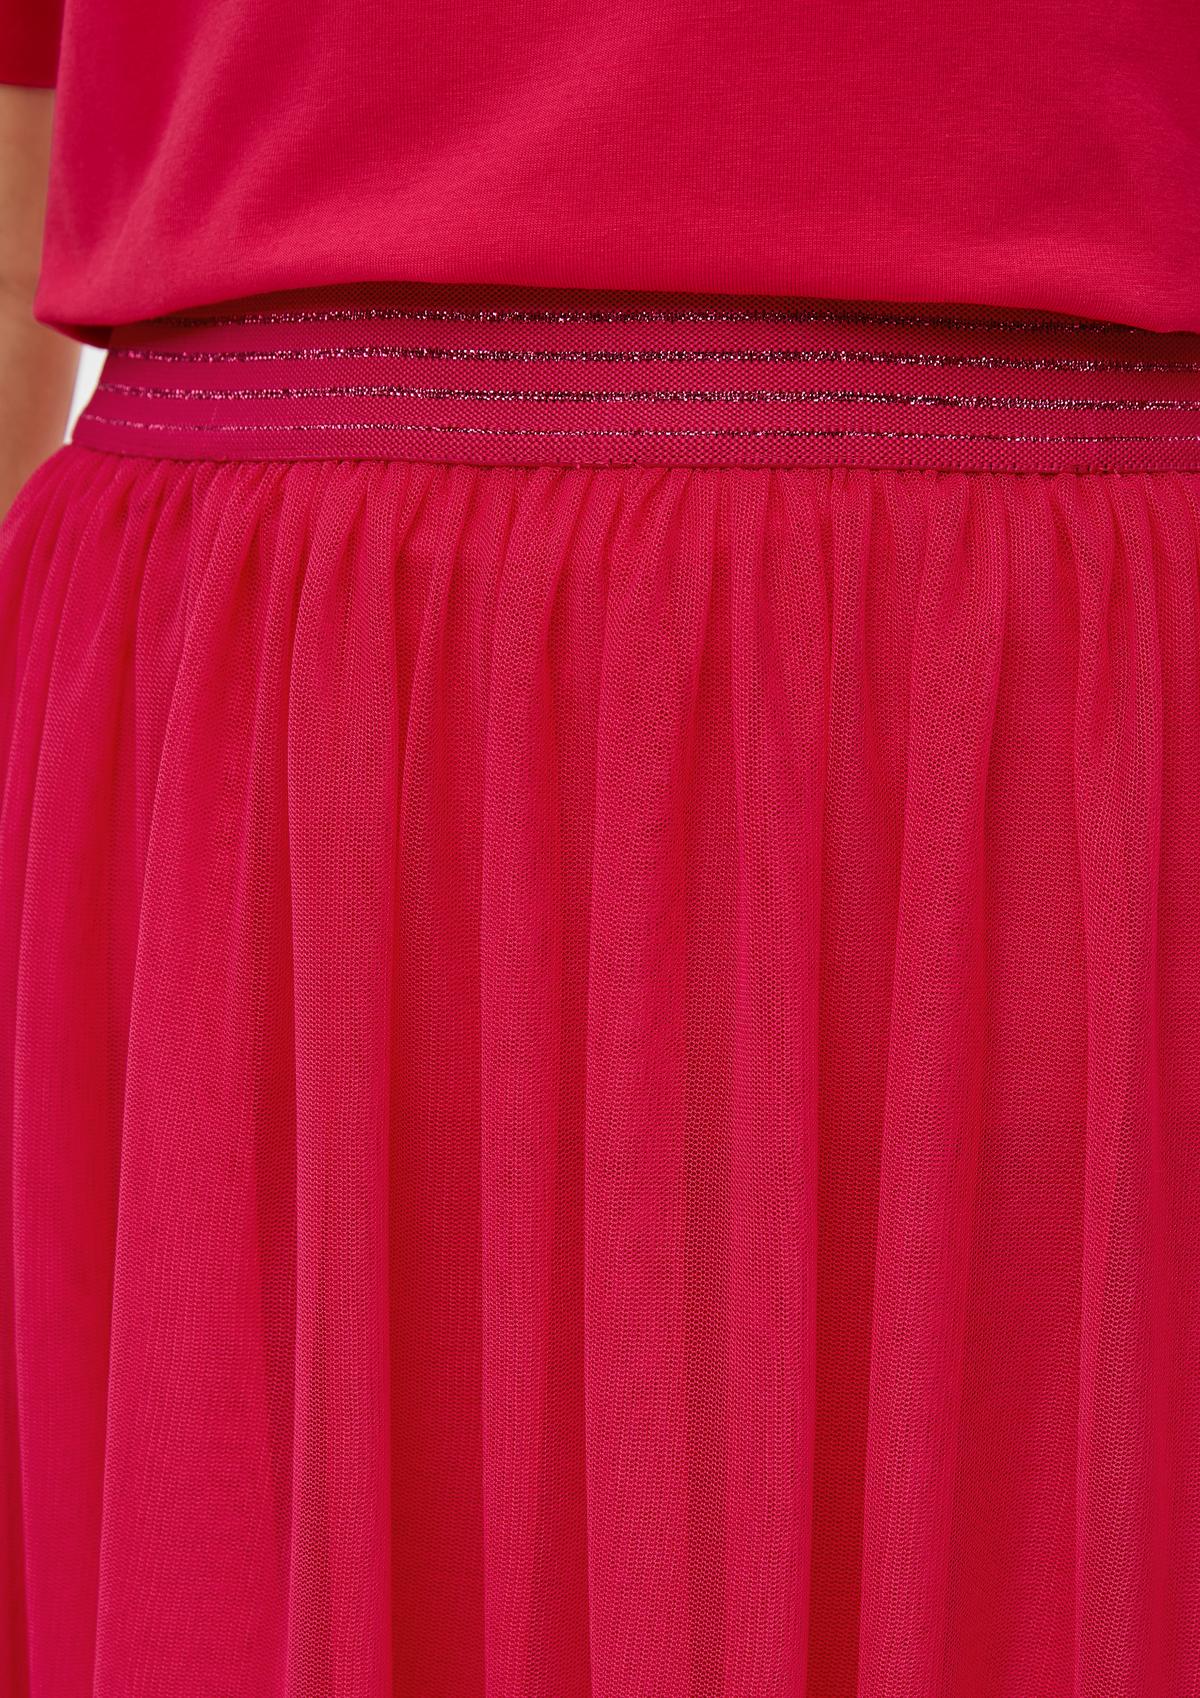 s.Oliver Tulle skirt with an elasticated waistband